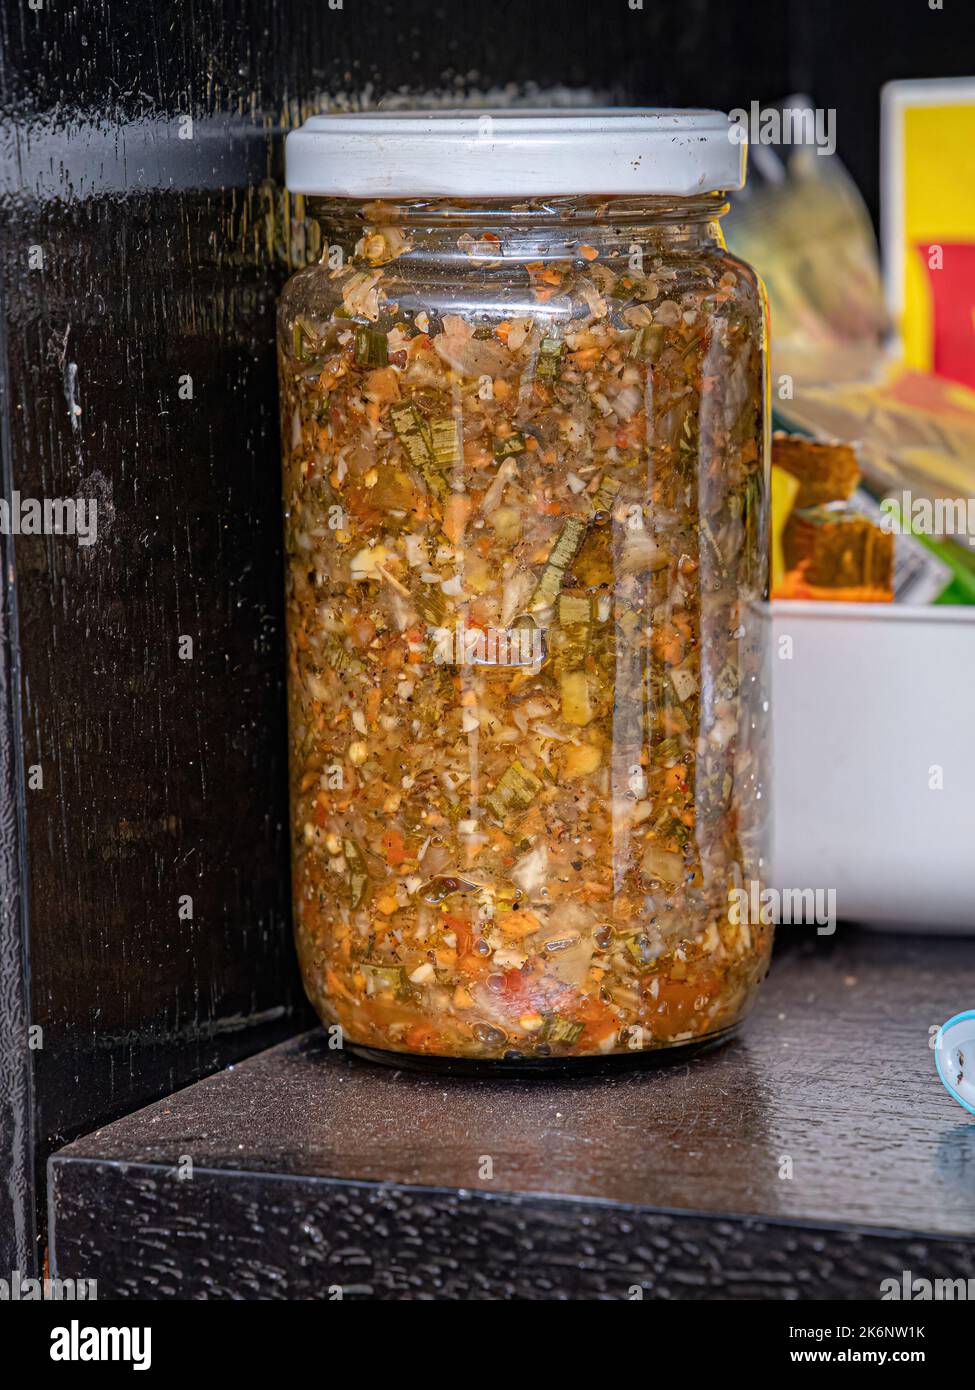 Seasoning jar made with yellow peppers, green peppers, red peppers, garlic, onions, chives, green onions, parsley, salt, olive oil, oregano and dried Stock Photo